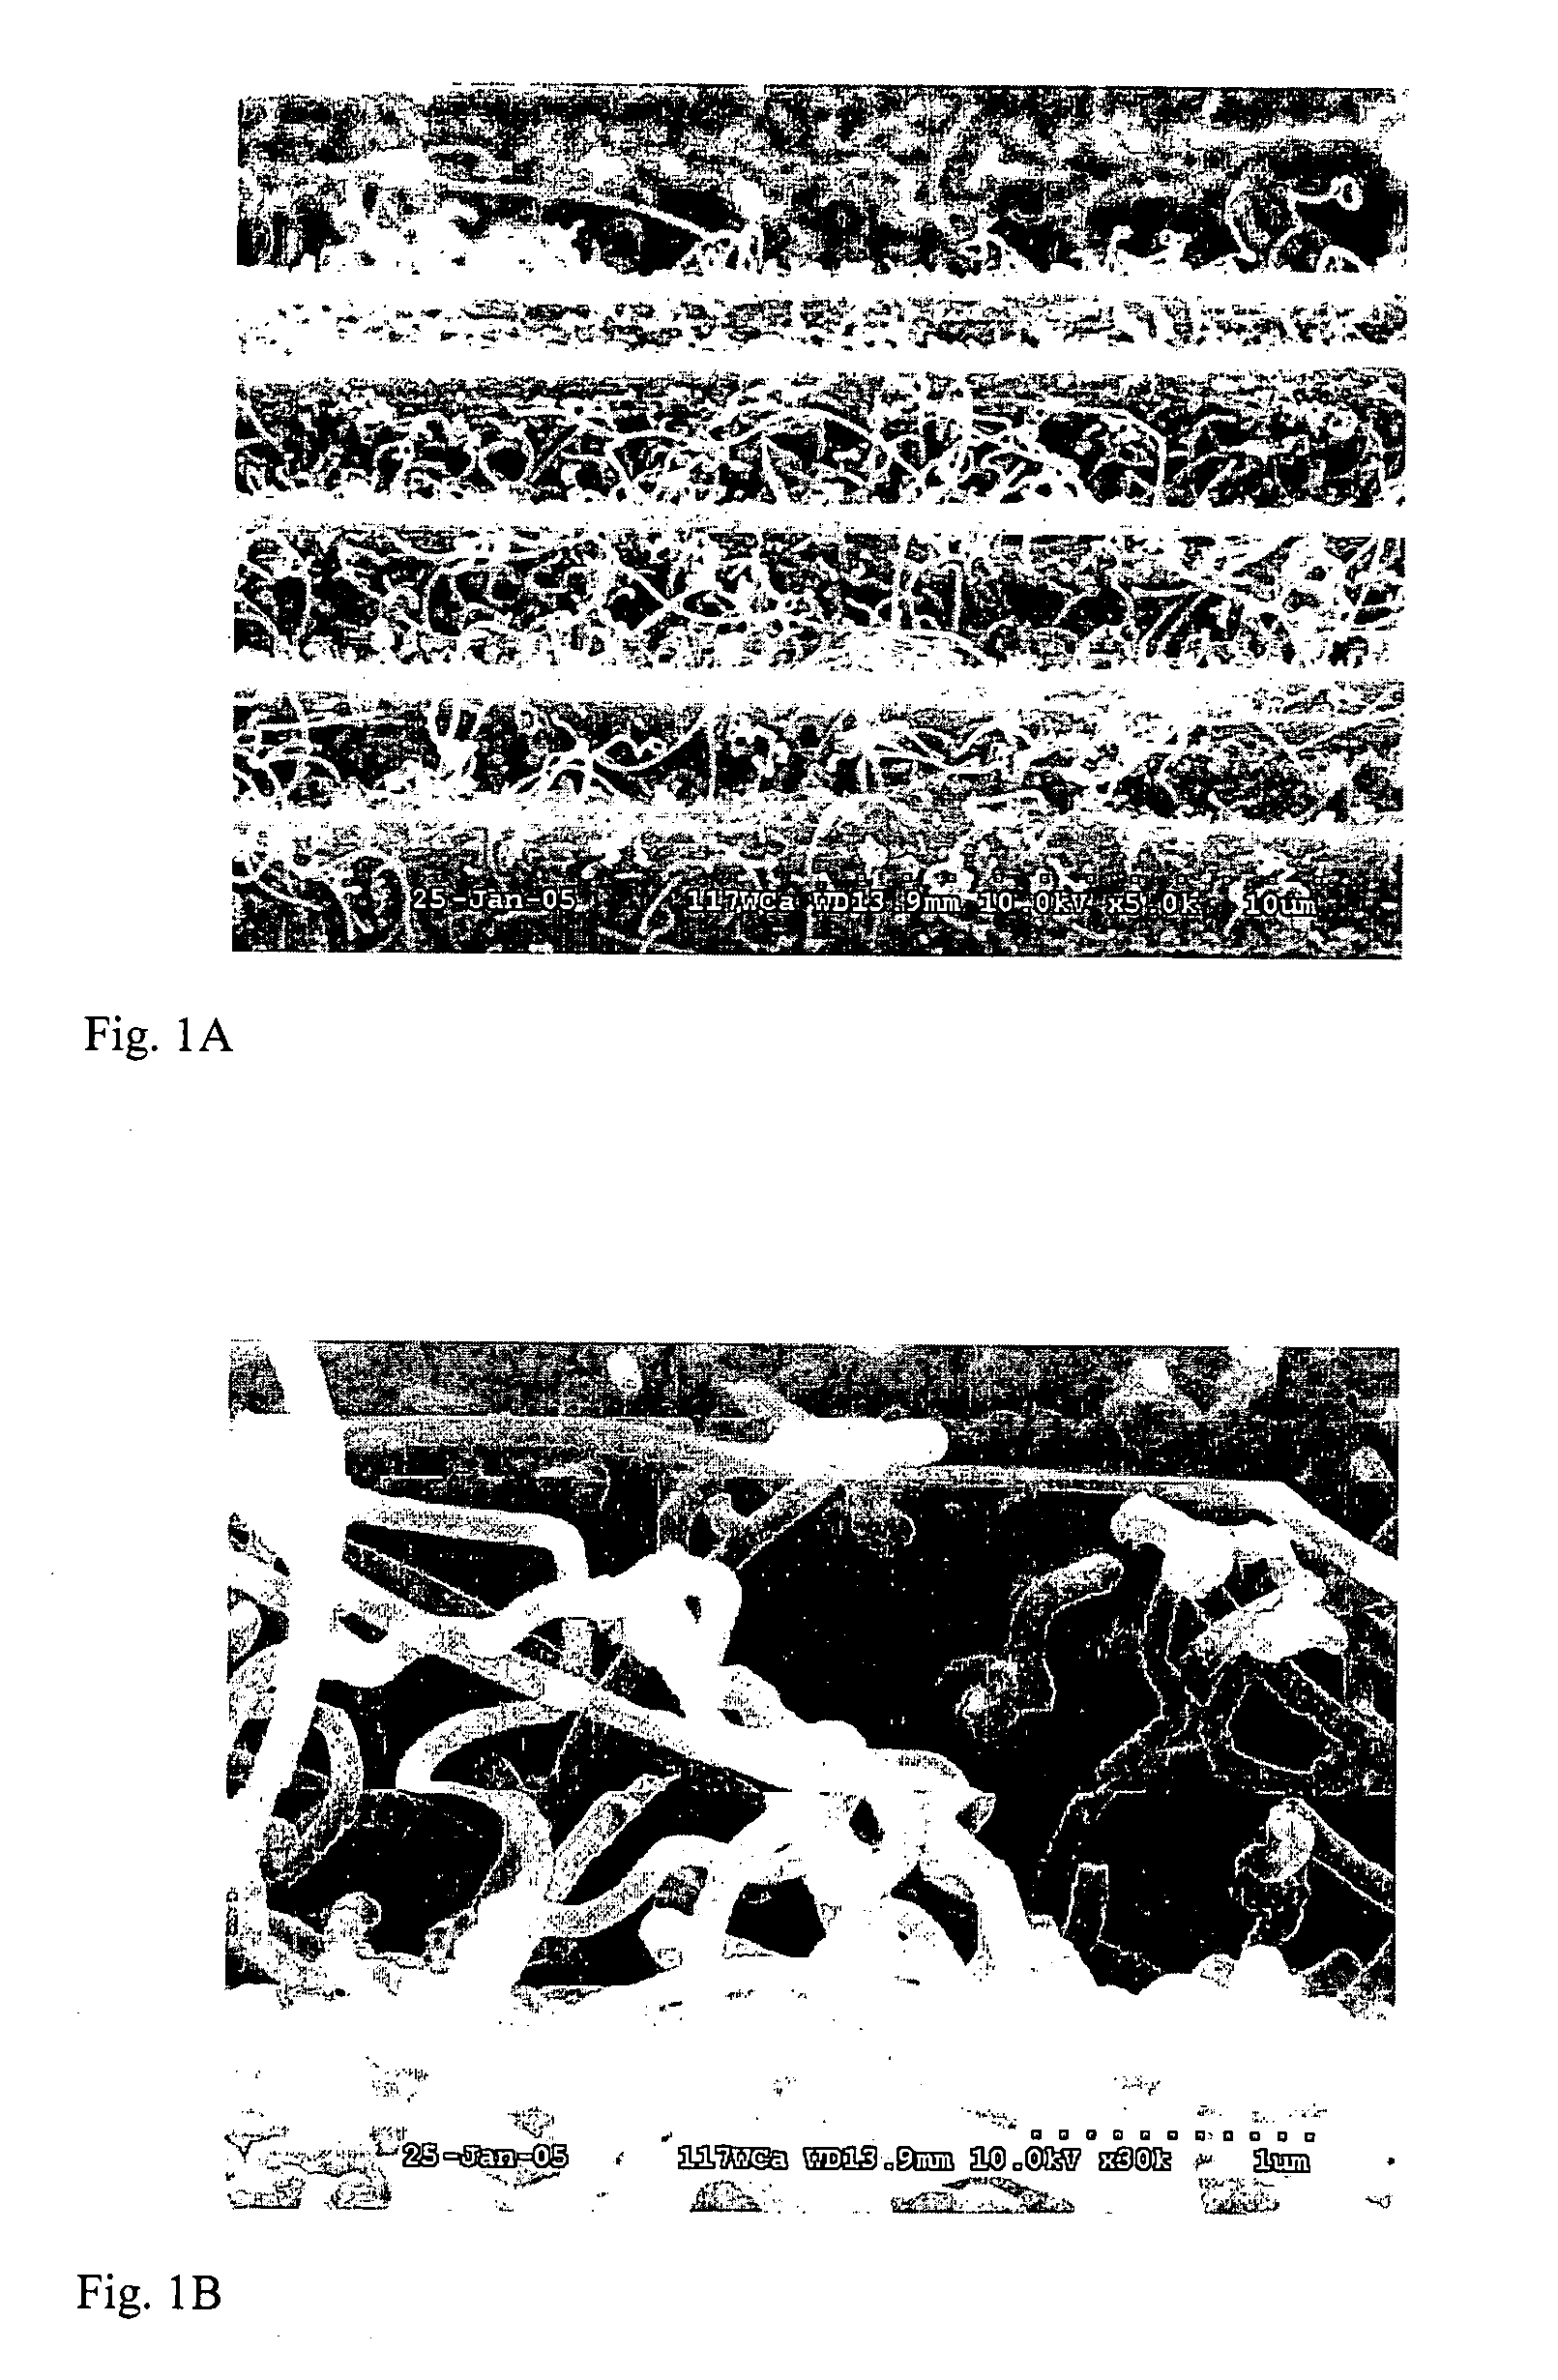 Vapor grown carbon fiber reinforced composite materials and methods of making and using same